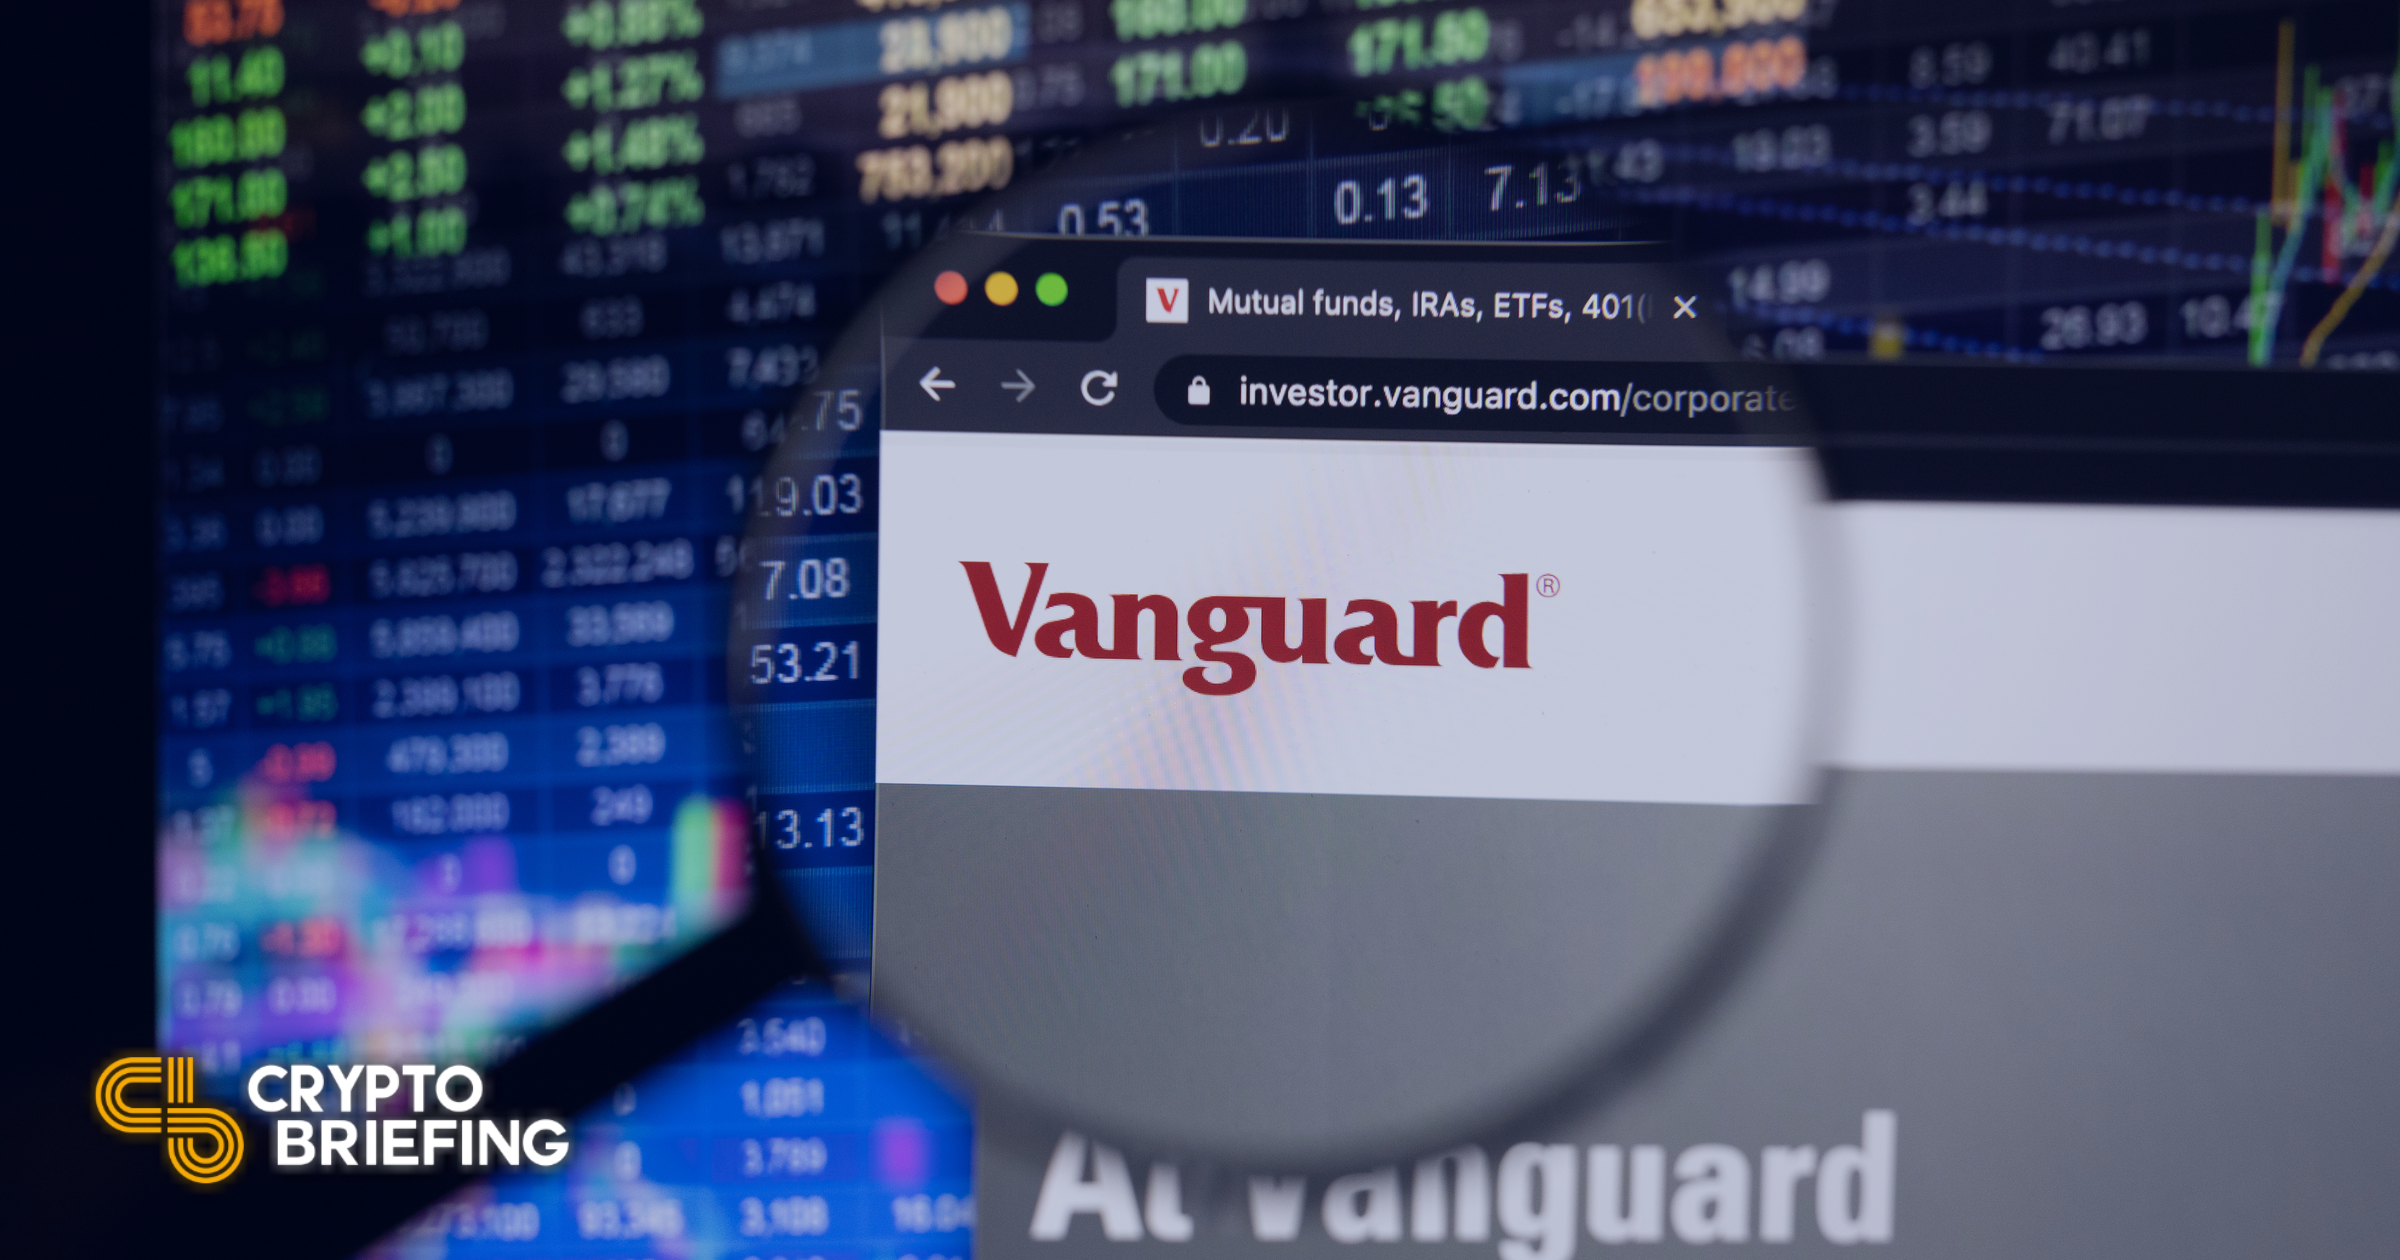 Vanguard cryptocurrency etf cryptocurrency 2018 when the law catches up with game-changing technology